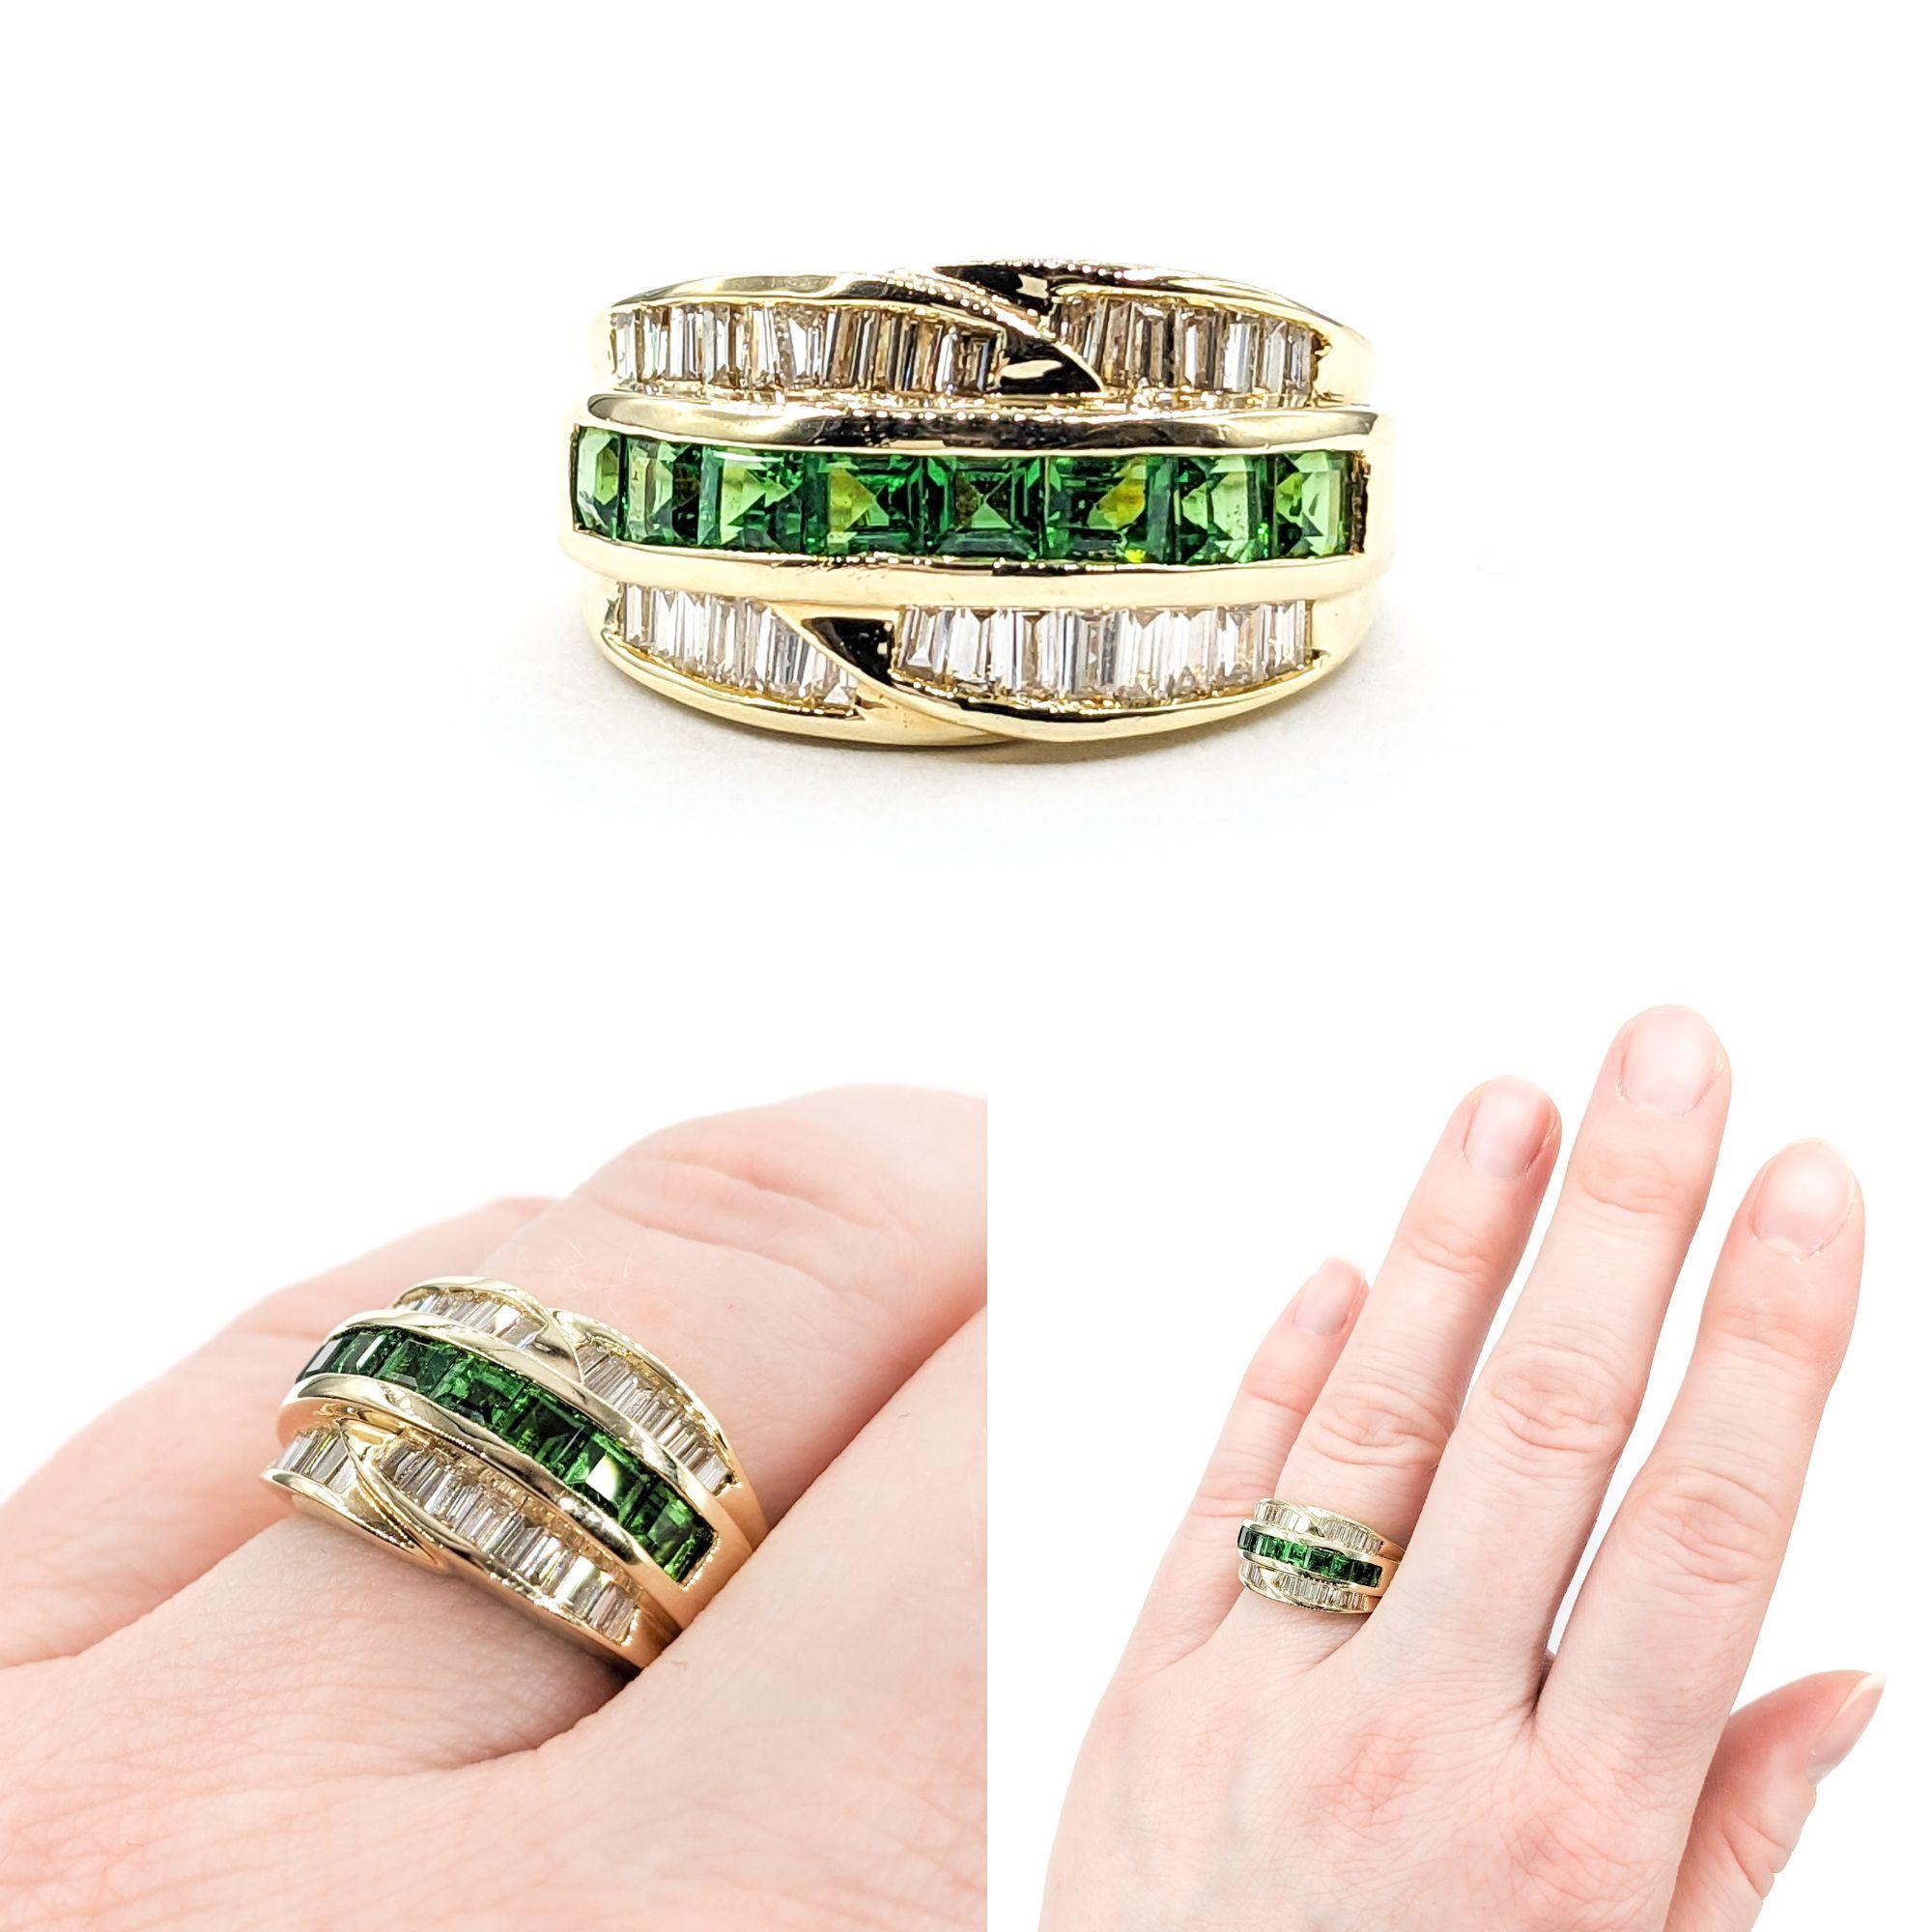 Channel Set .54ctw Tsavorite Garnets & .75ctw diamonds Ring In Yellow Gold


This striking Gemstone Fashion Ring, artfully crafted in 14kt Yellow gold, boasts a vibrant .54ctw Tsavorite Garnets centerpiece, beautifully complemented by .75ctw